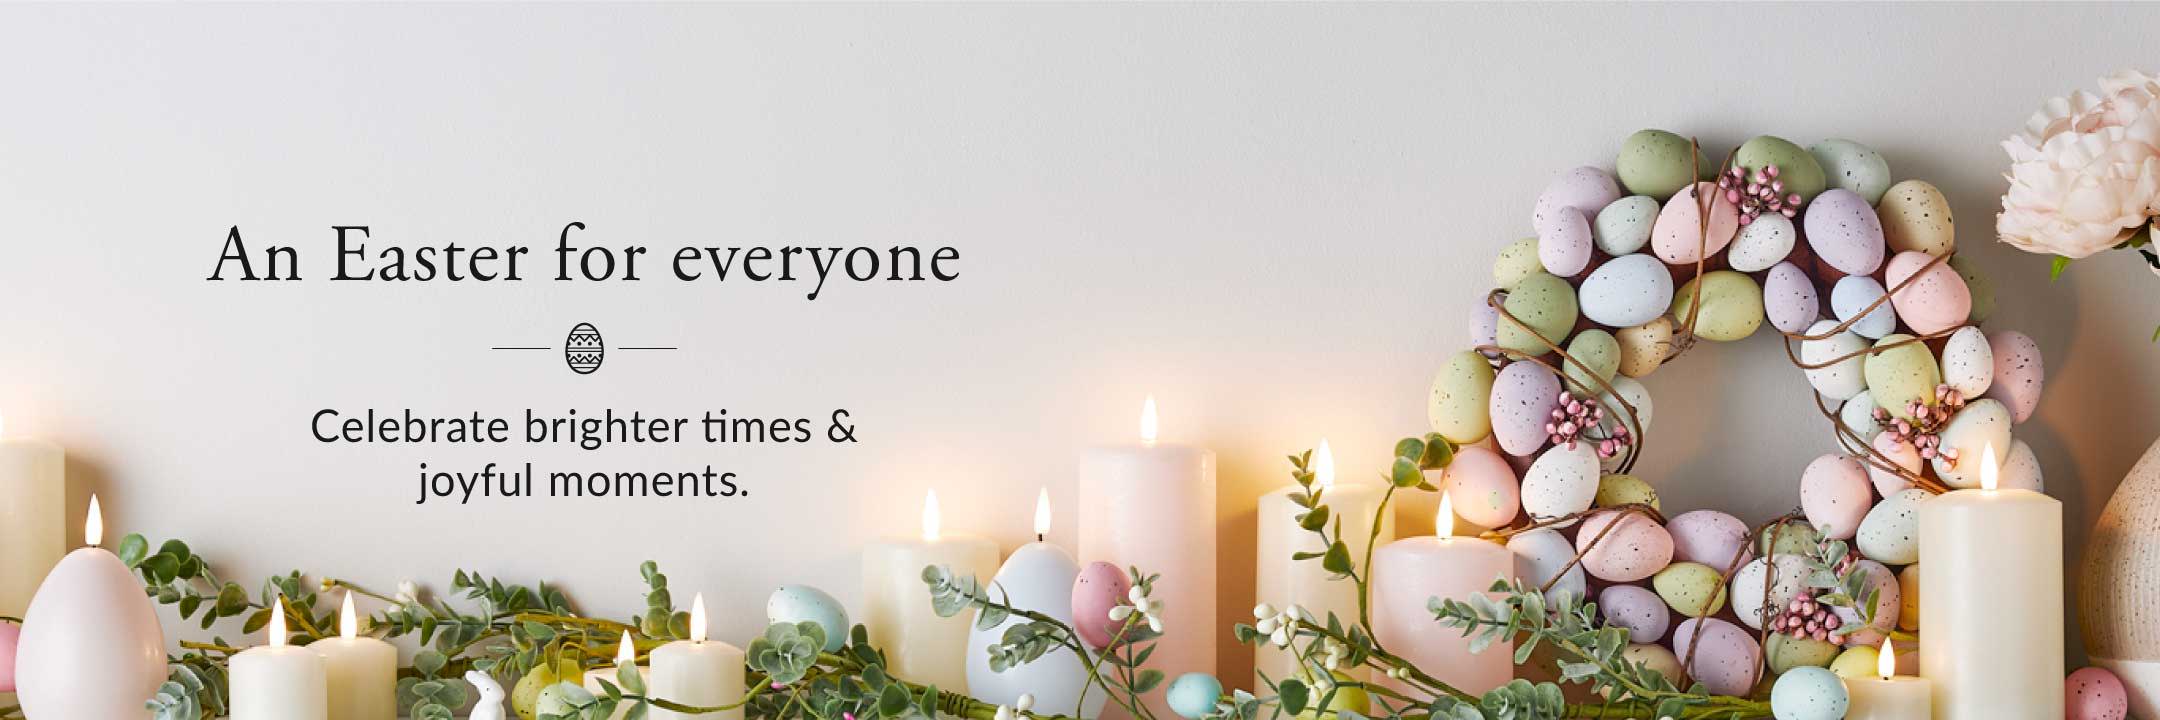 An Easter wreath and candle image reading: An Easter for everyone. Celebrate brighter times and joyful moments.